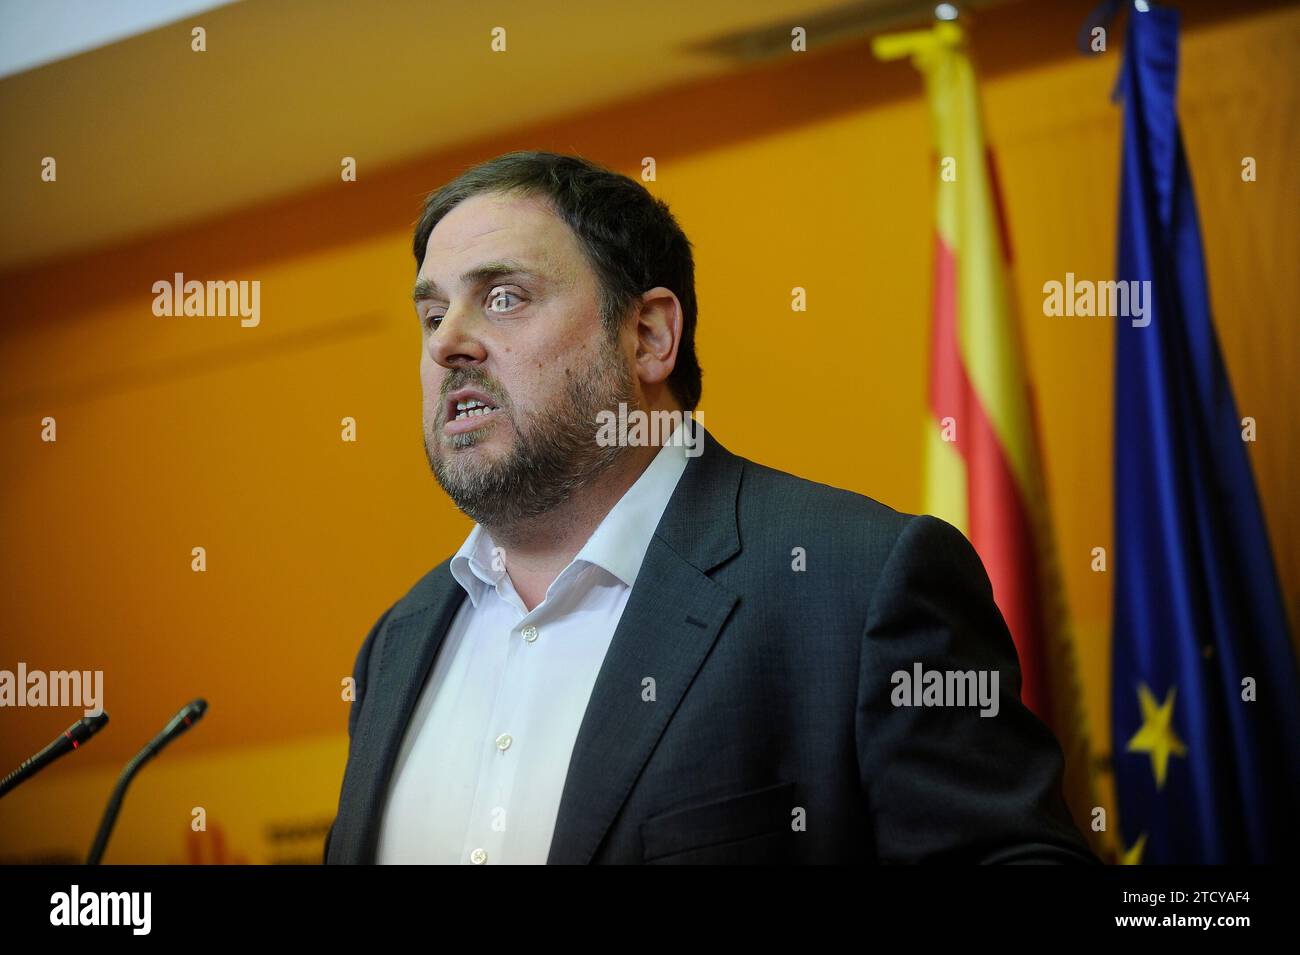 Barcelona, 01/04/2016. Press conference by Oriol Junqueras, after the extraordinary executive meeting of ERC. Photo: Ines Baucells ARCHDC. Credit: Album / Archivo ABC / Inés Baucells Stock Photo